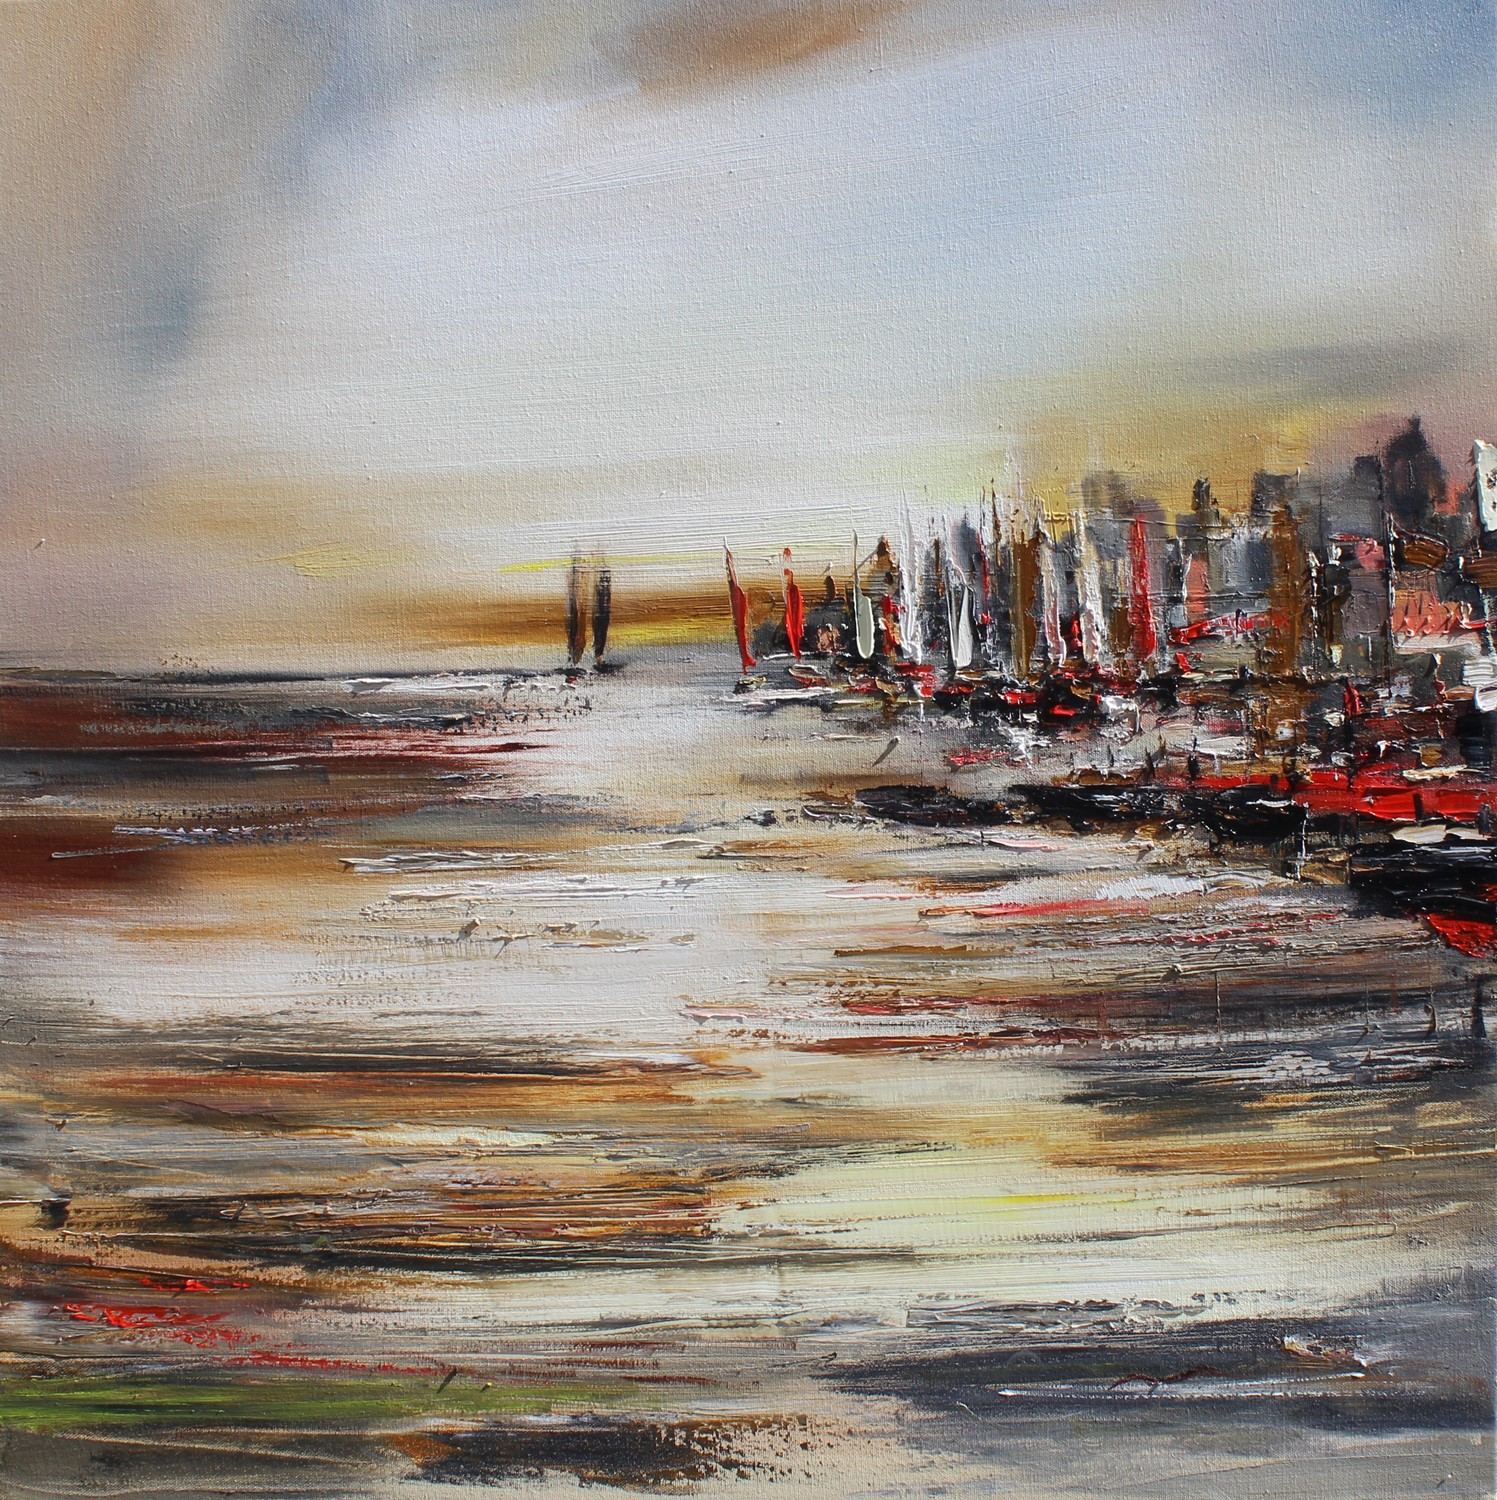 'Out by The East Coast' by artist Rosanne Barr